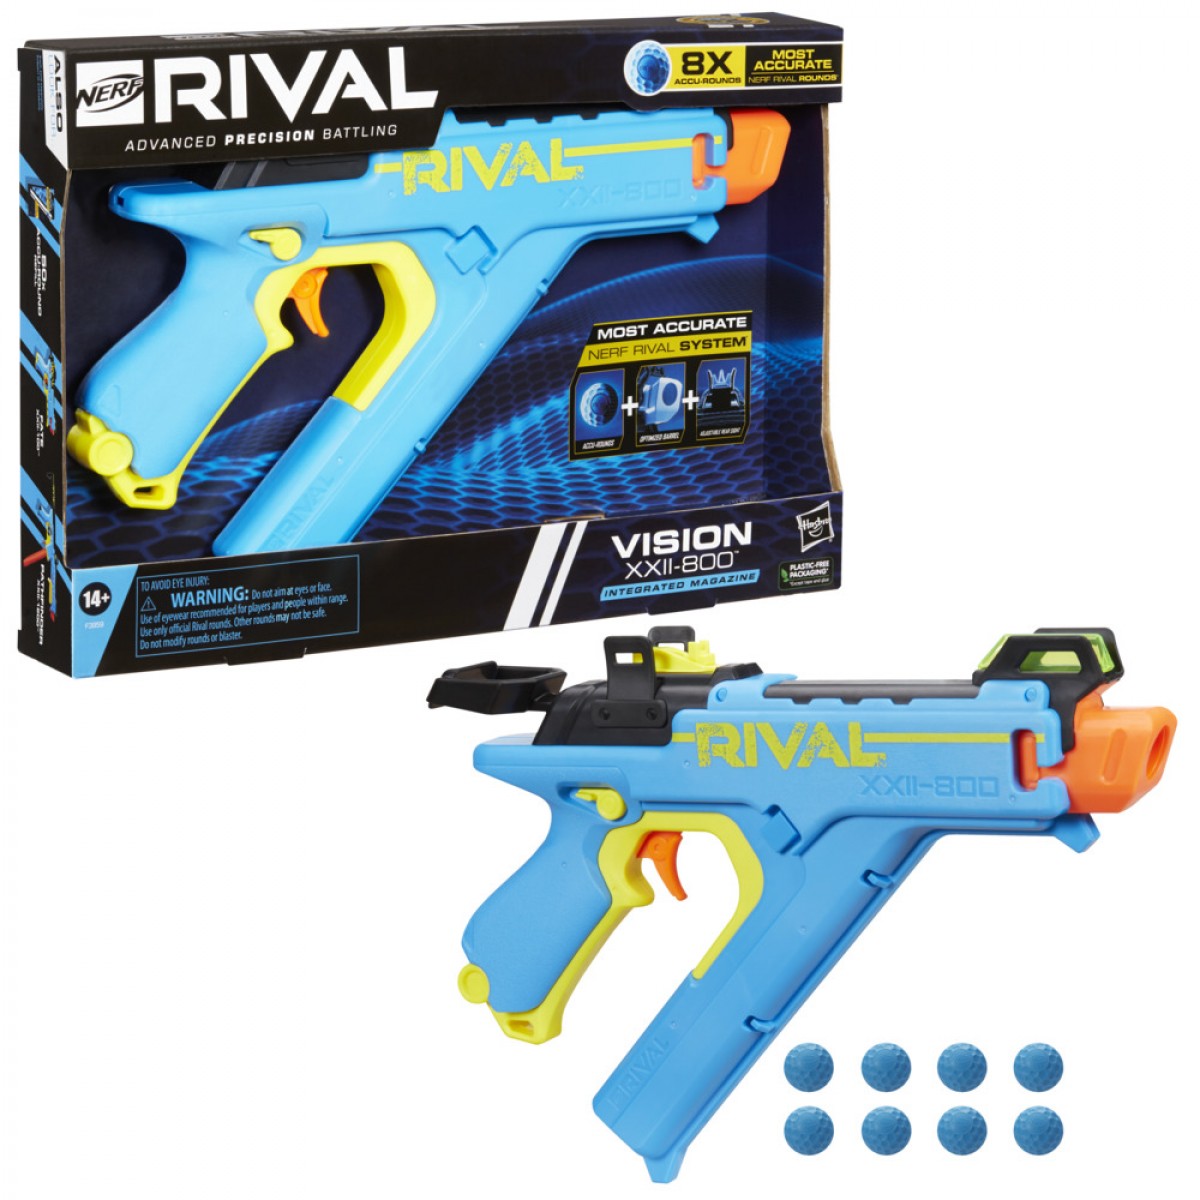 Nerf Rival Vision Xxii-800 Blaster, Most Accurate Nerf Rival System, Adjustable Sight, Integrated Magazine, 8 Nerf Rival Accu-Rounds, 14Yrs+, Multicolour